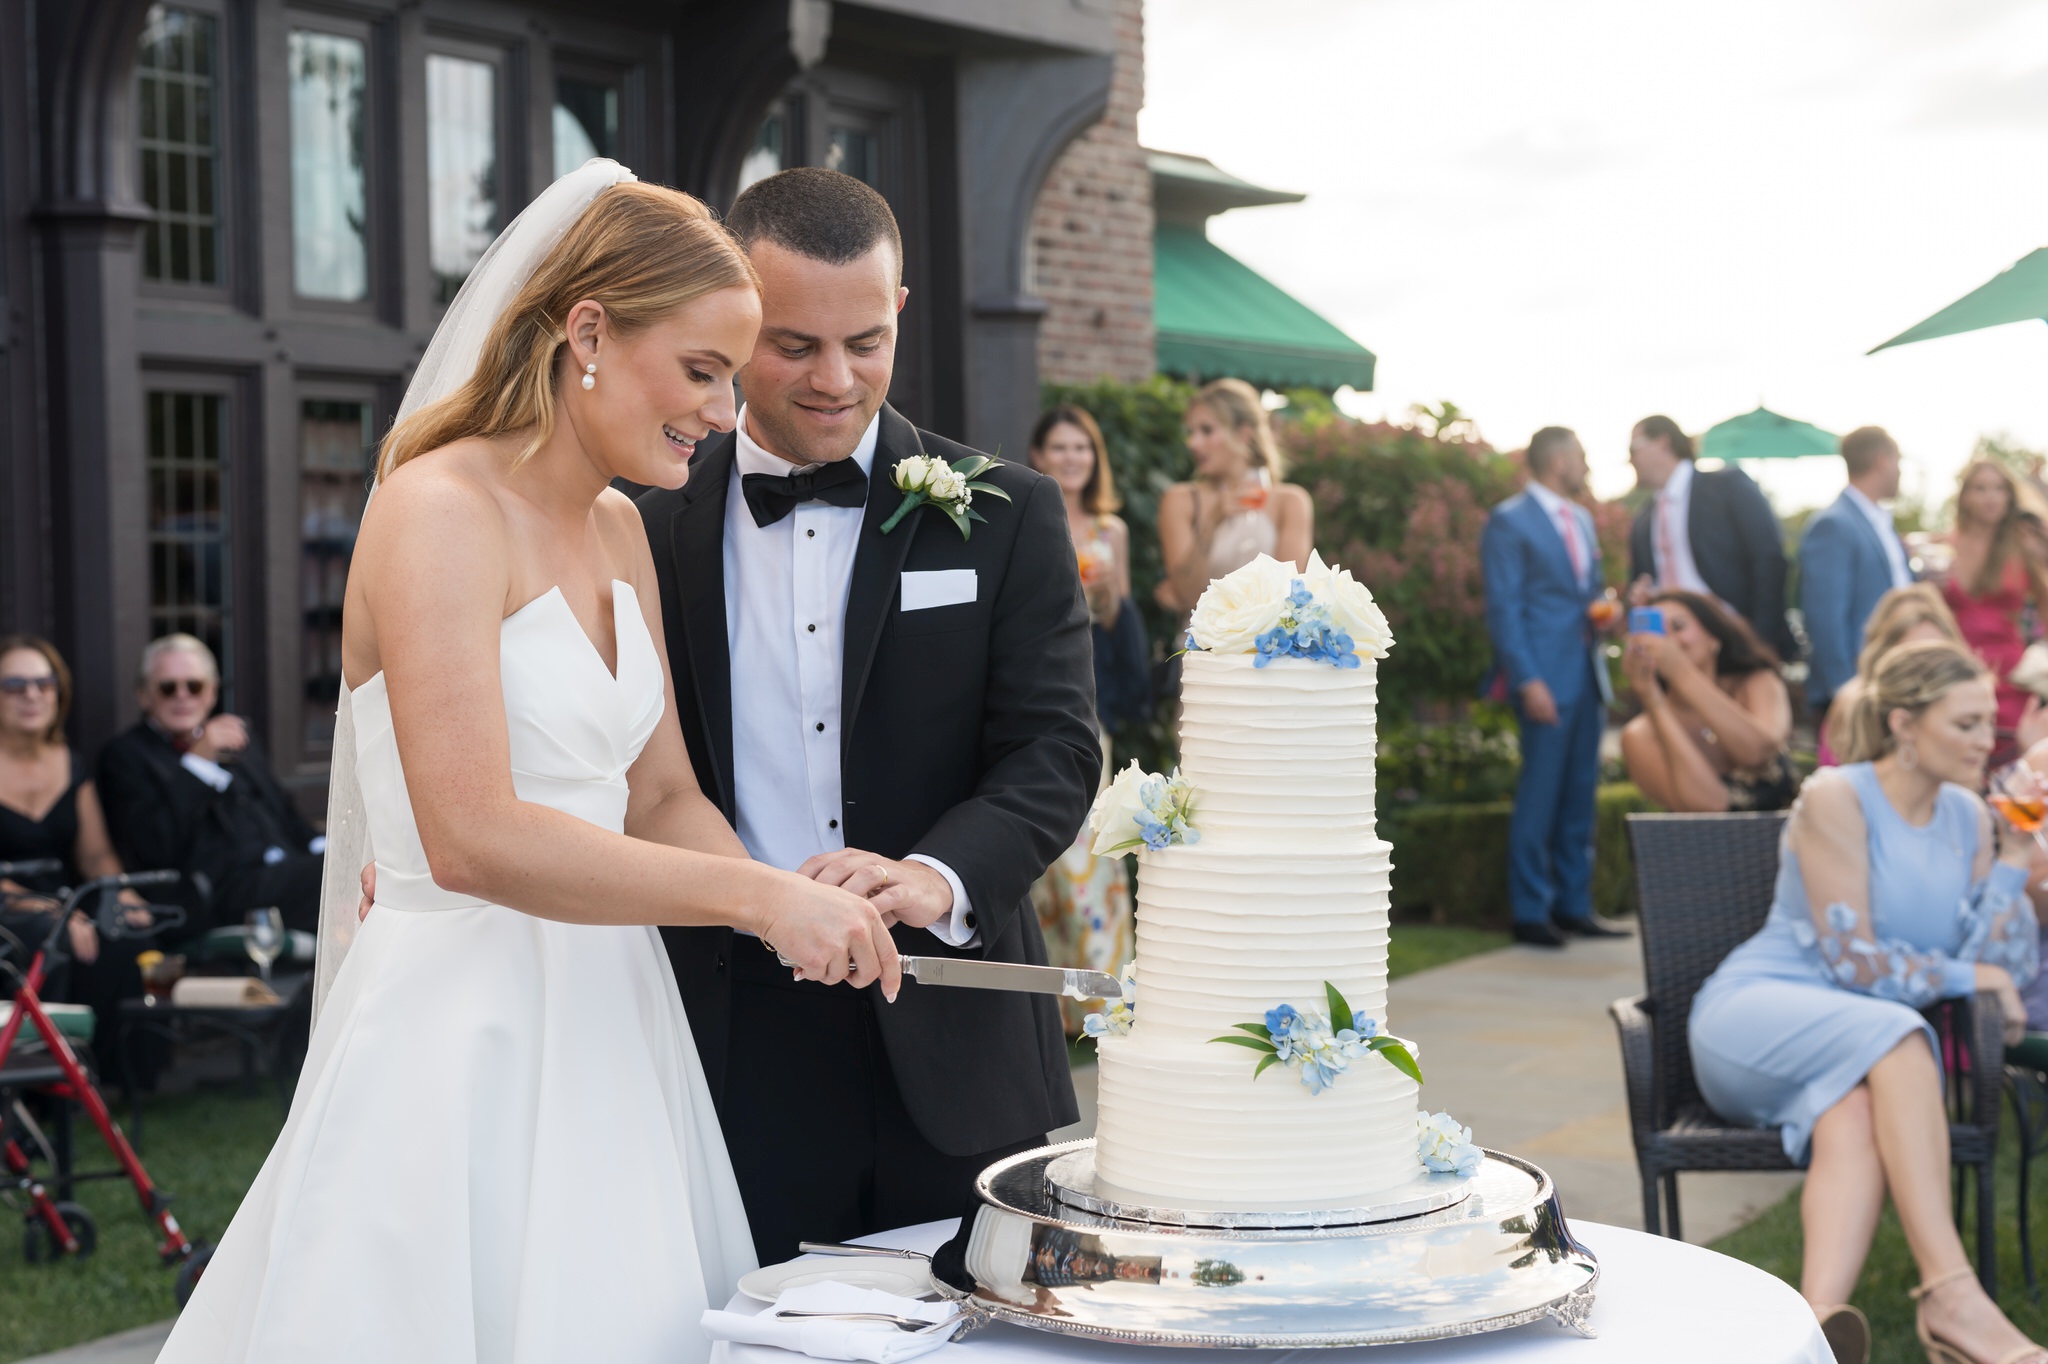 The bride and groom cut cake during their Country Club of Detroit wedding reception.